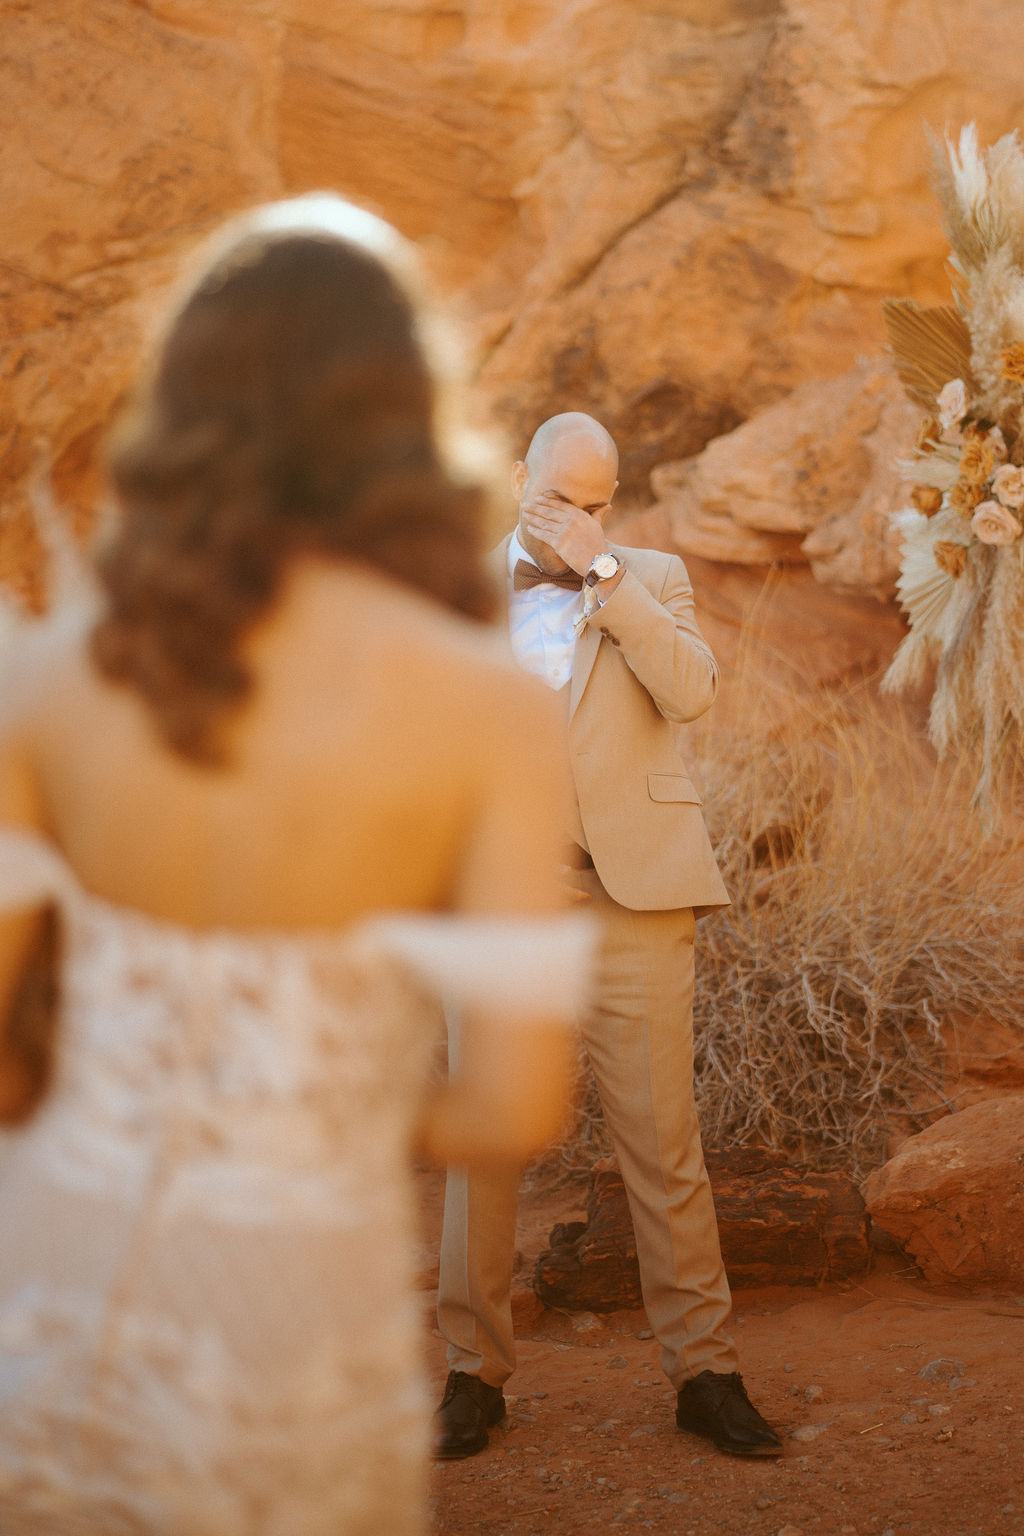 Grooms Reaction to Bride. International Couples! Welcome to the desert!